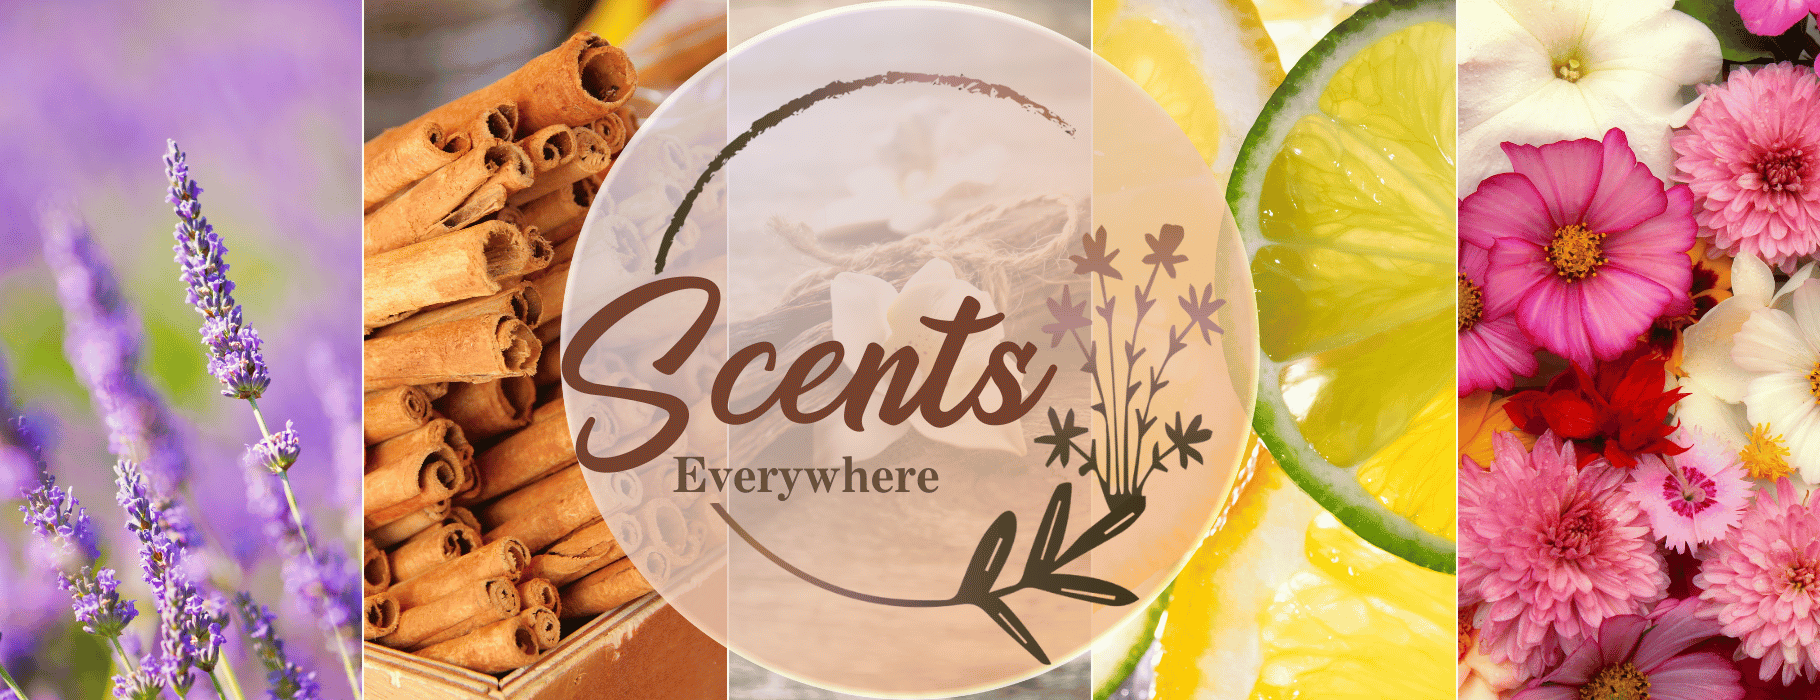 Main Scents Everywhere